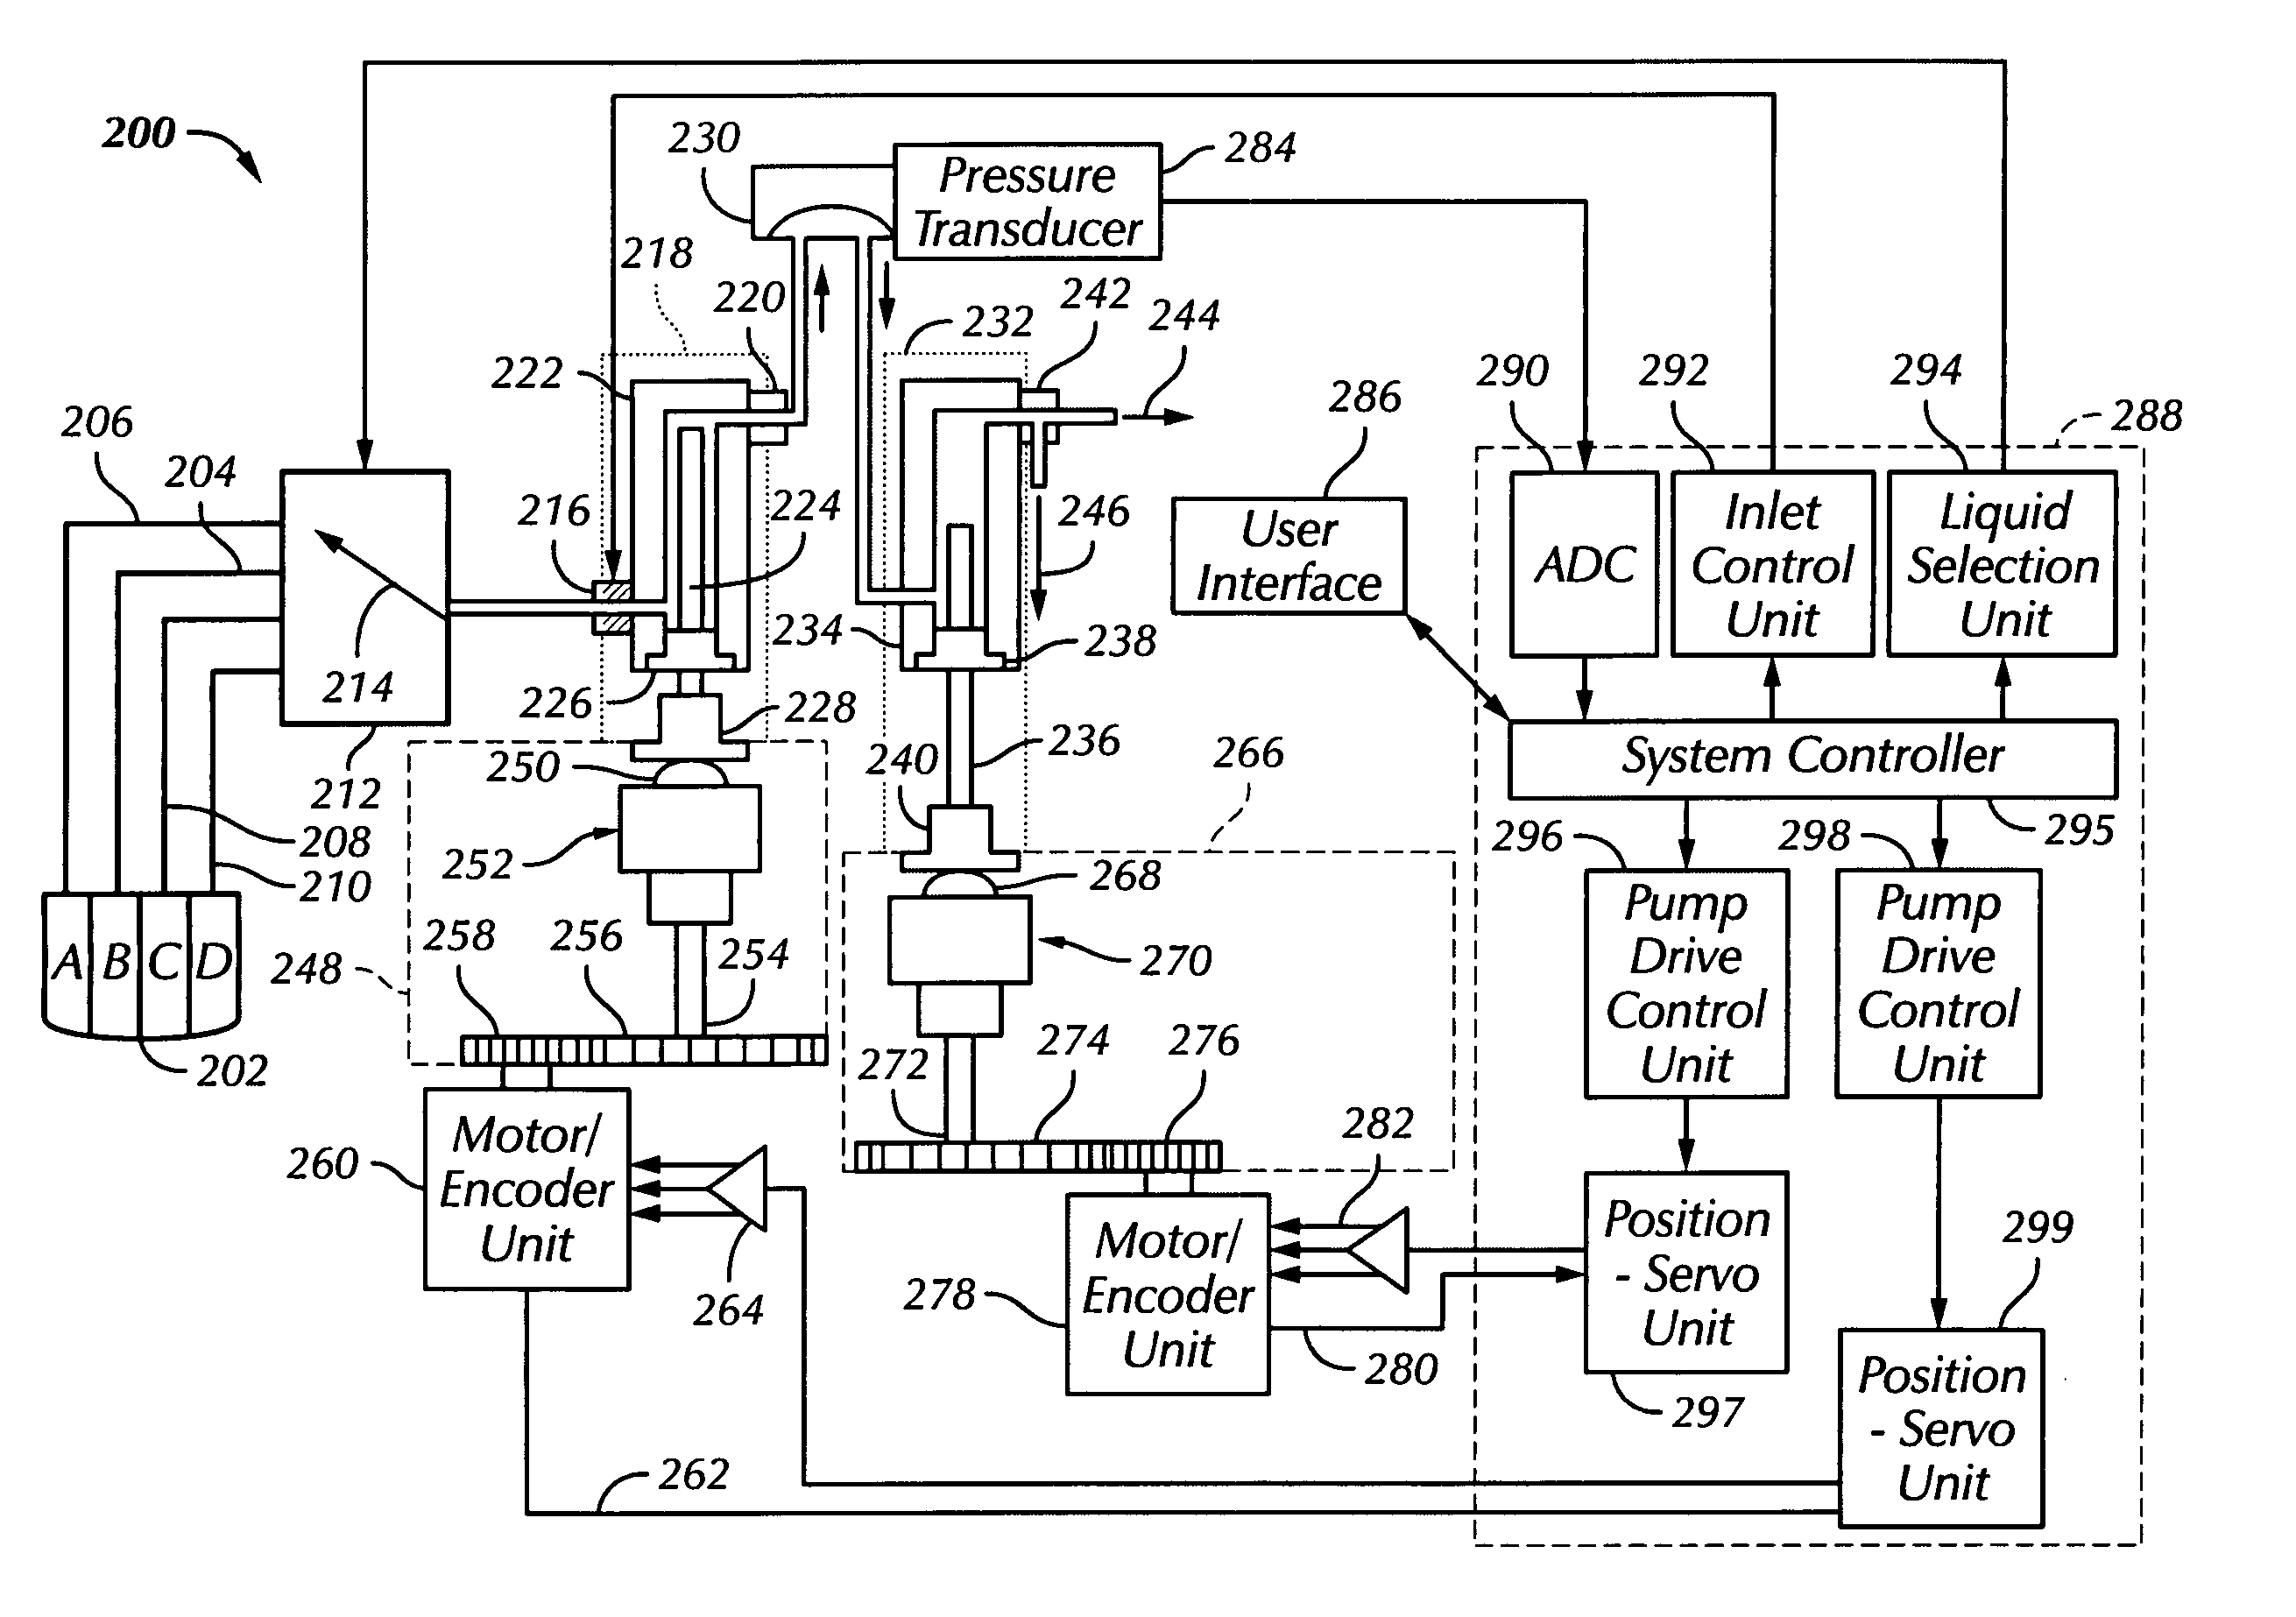 Chromatography system with waste output